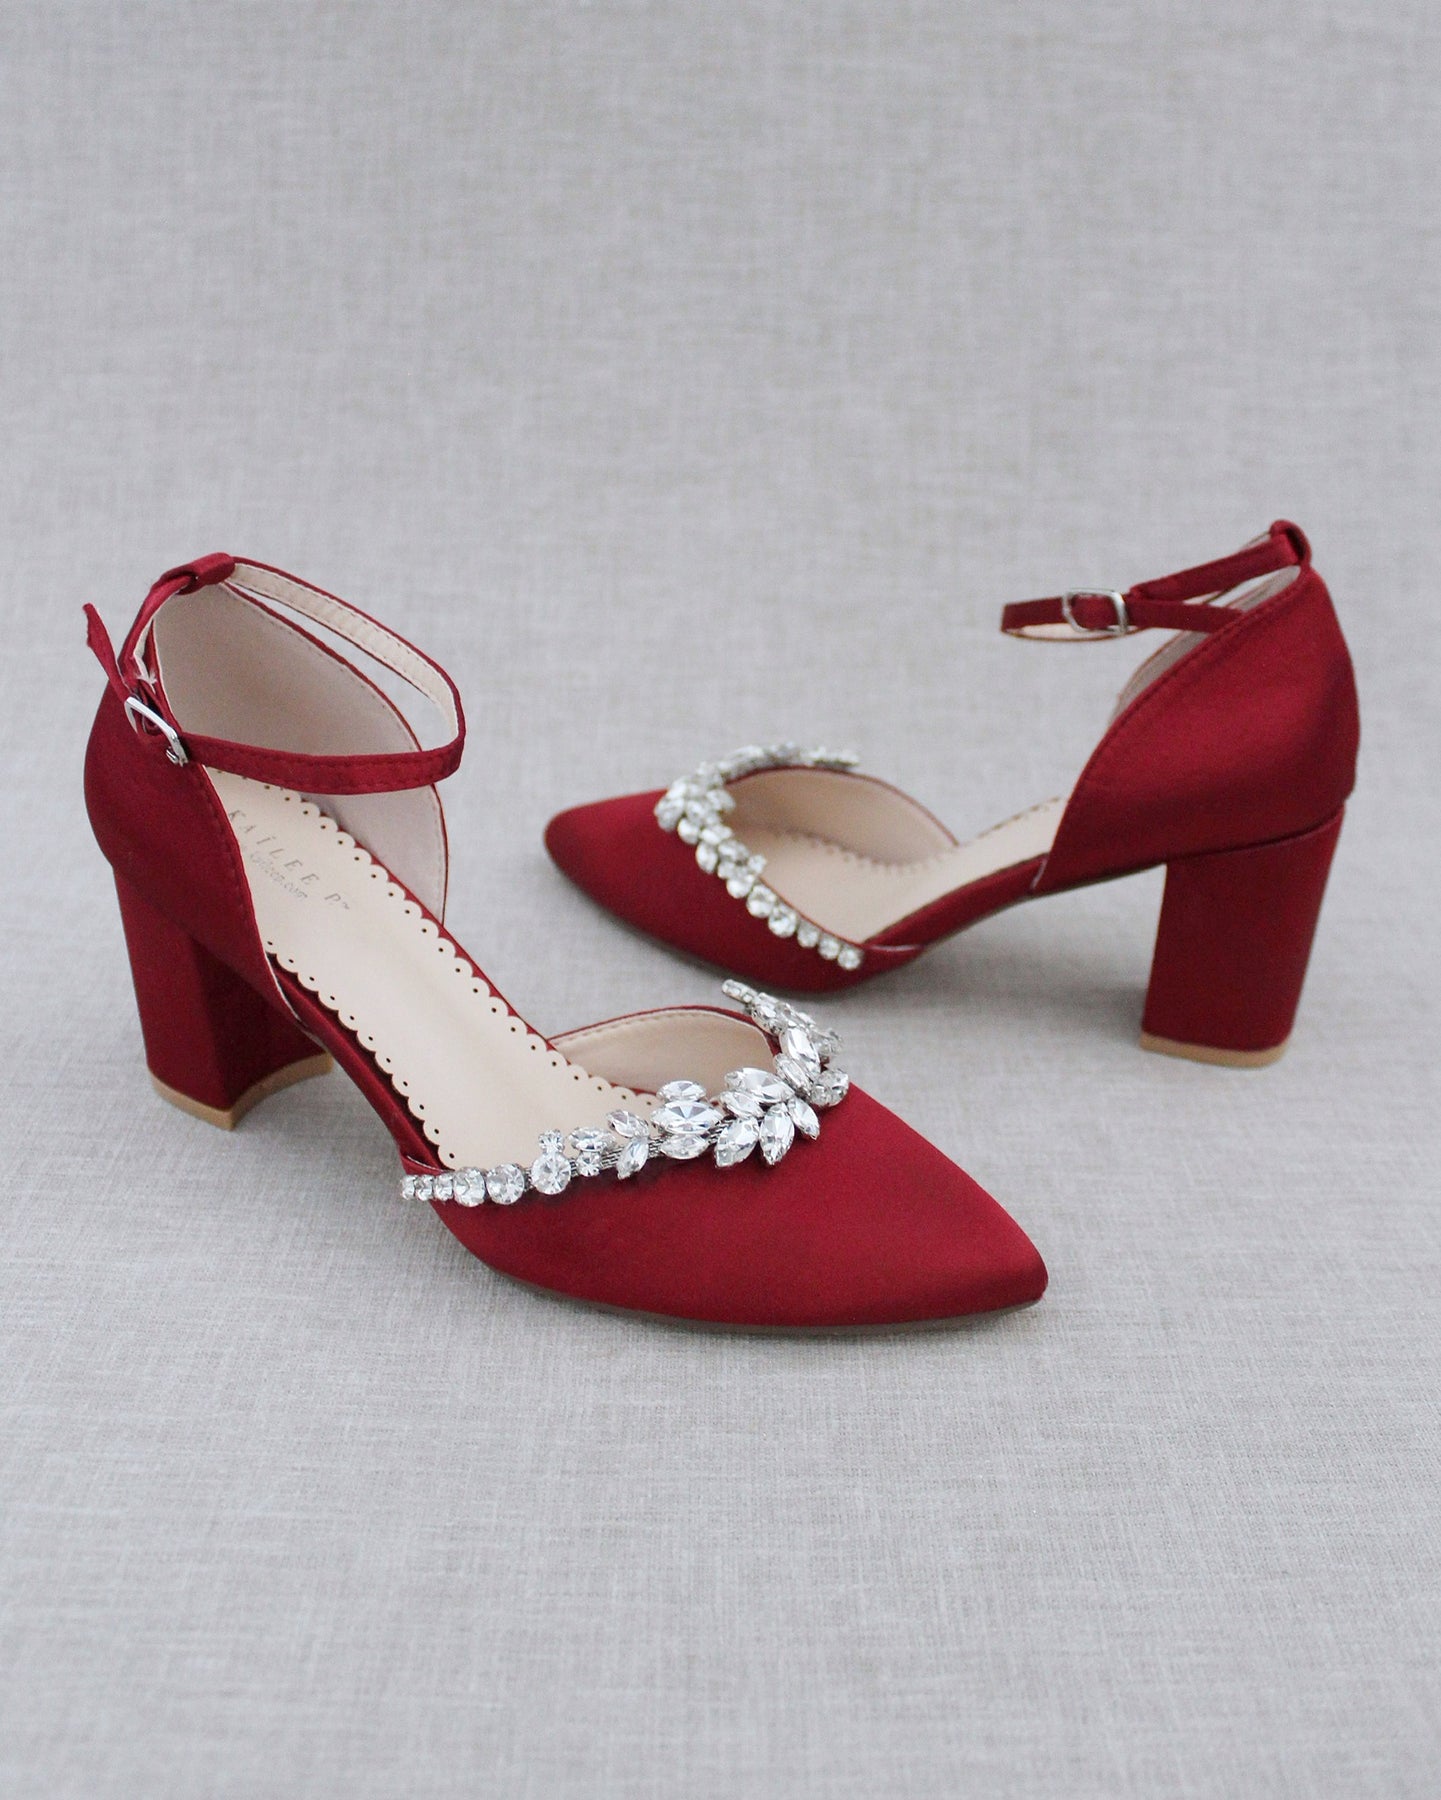 Gomelly High Heels for Women Pointed Toe Dress Shoes Stiletto Heels Party Pumps  Dark Red 7.5 - Walmart.com